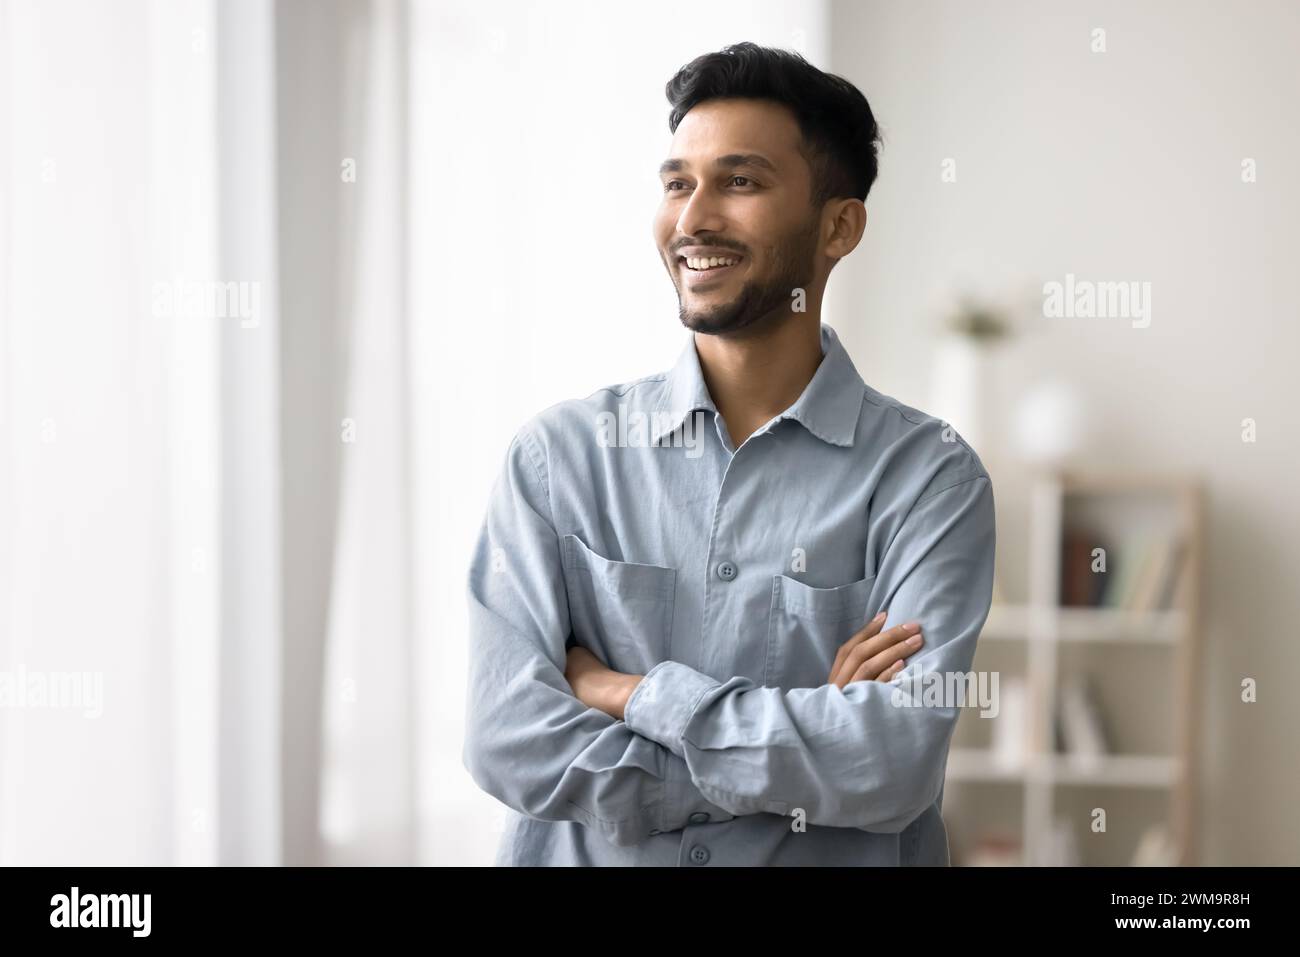 Indian man standing with arms crossed smiling looking away Stock Photo